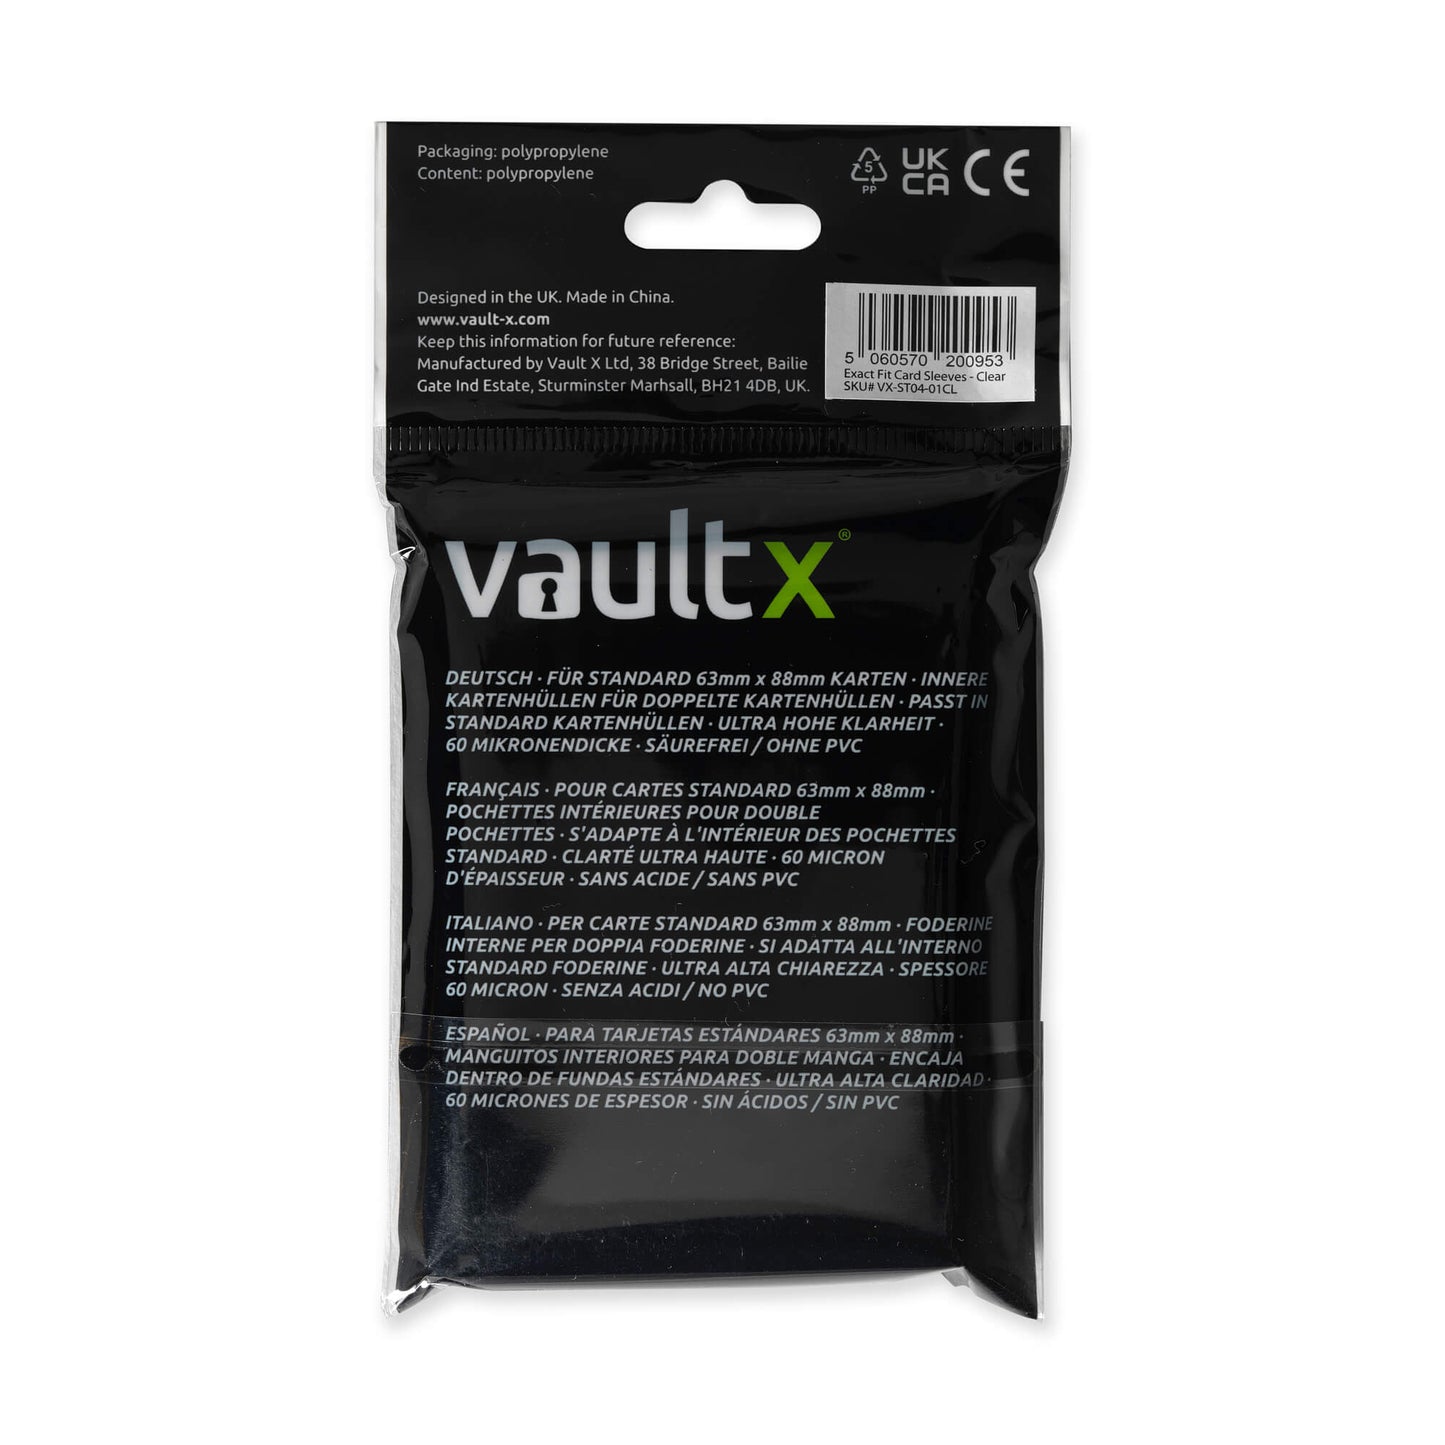 Vault X Exact Fit Card Sleeves - 100 Pack